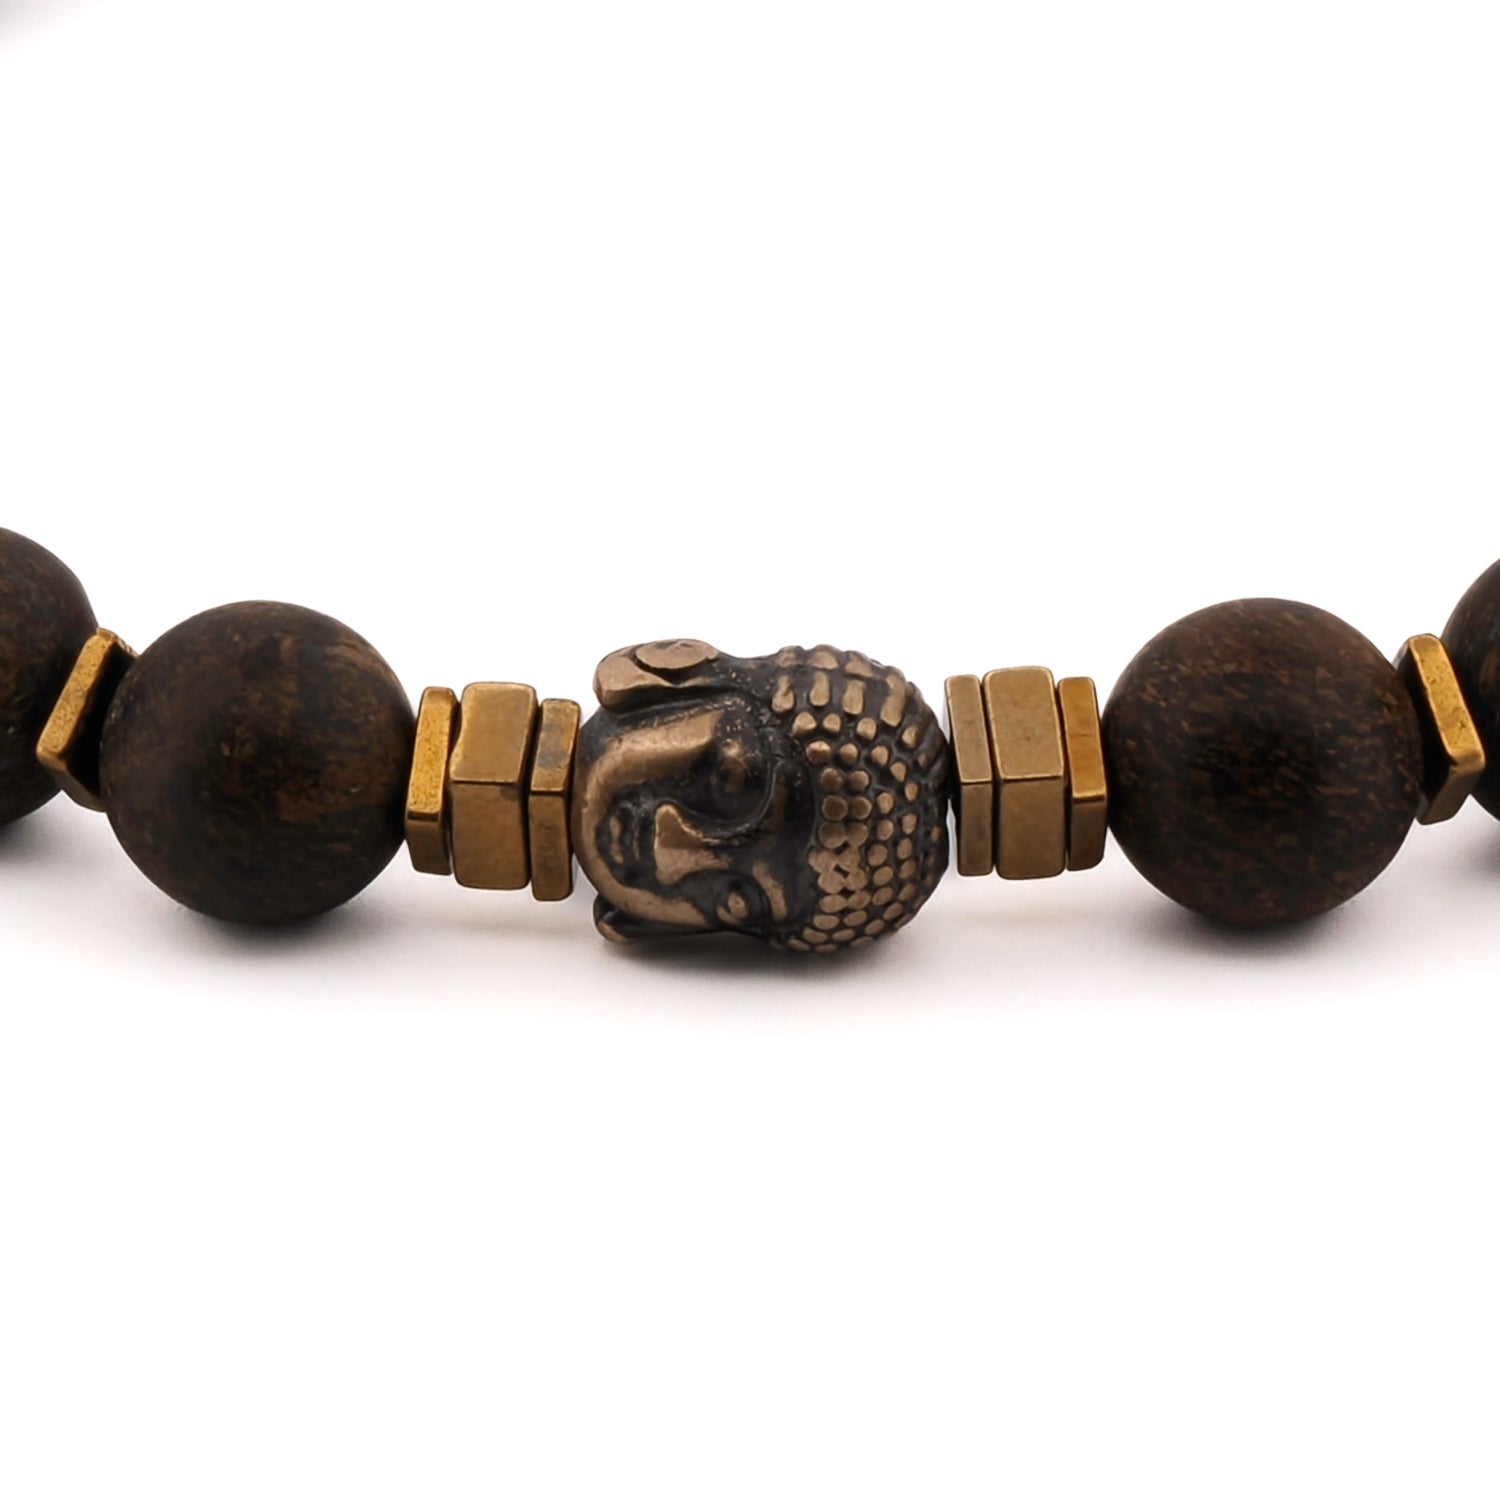 Handcrafted Spiritual Bracelet with Nepal beads and a Buddha charm, designed for grounding and tranquility